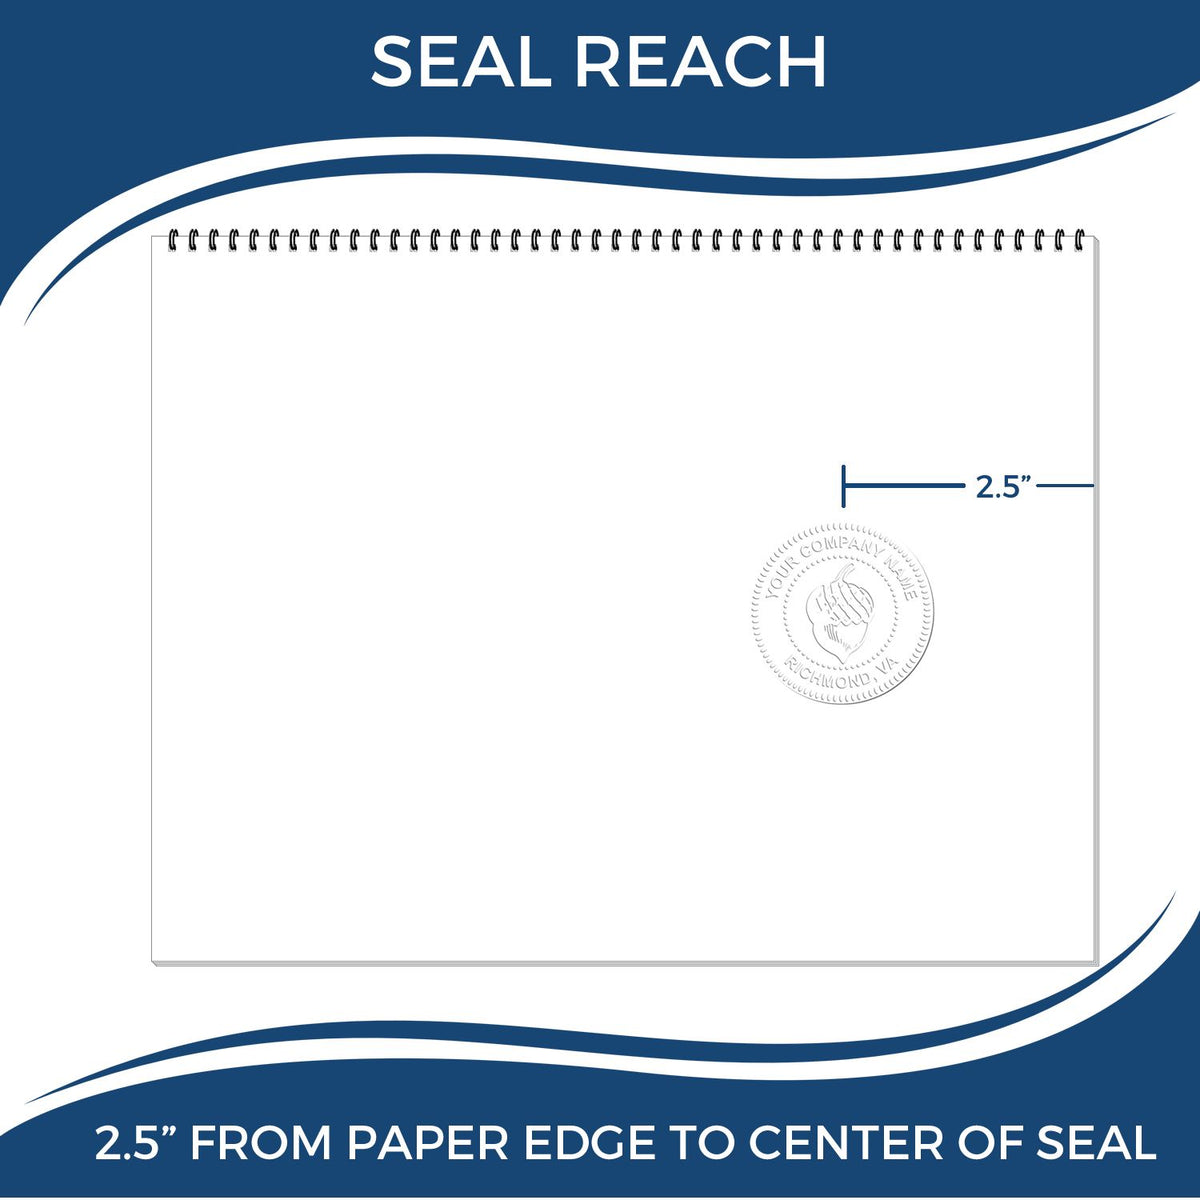 An infographic showing the seal reach which is represented by a ruler and a miniature seal image of the Heavy Duty Cast Iron Alaska Land Surveyor Seal Embosser